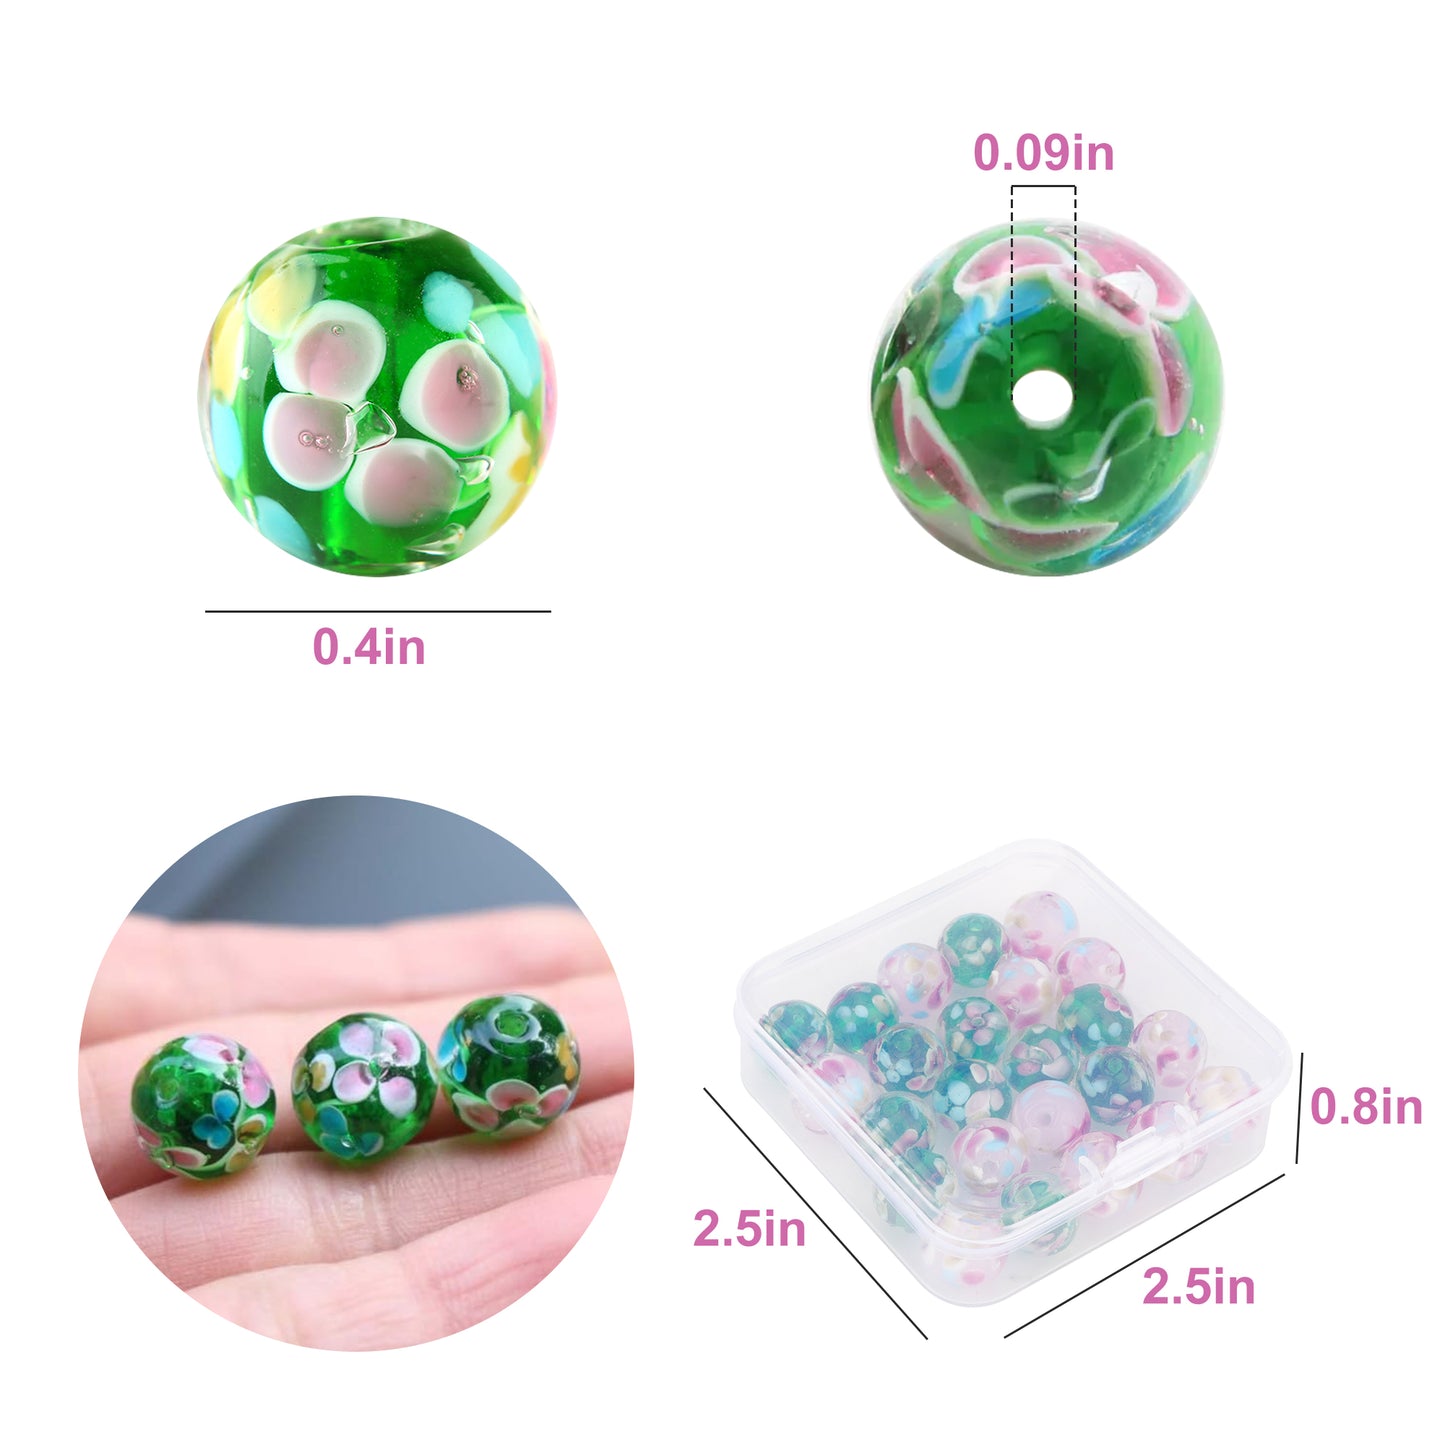 24Pcs 12mm petal flower Glass Beads - Handmade Glass Charm for Jewelry Bracelet Necklace Making Craft DIY Material Supplies (Green + Pink)